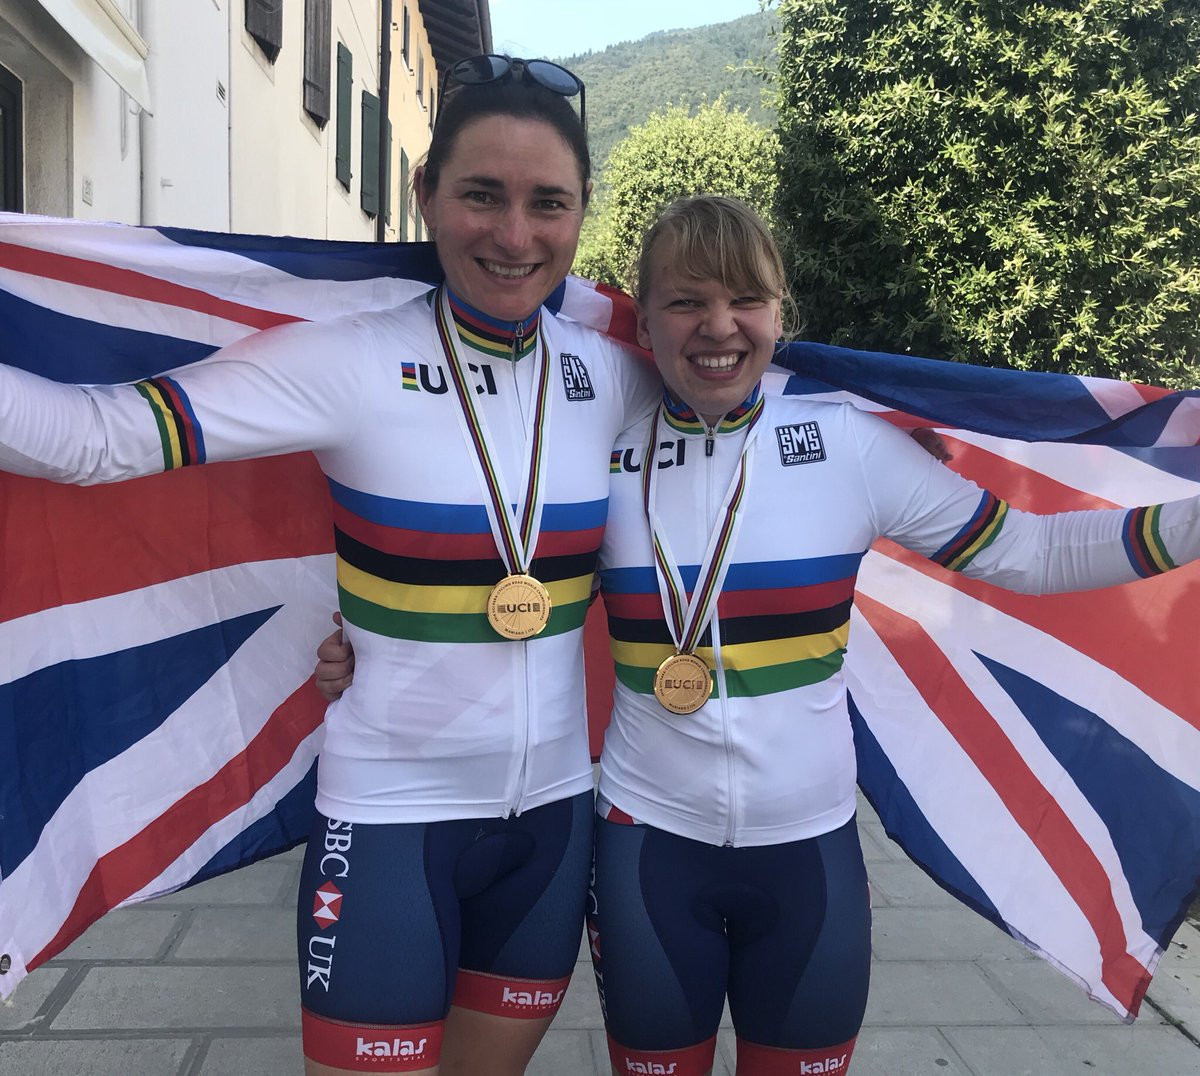 Dame Sarah Storey, left, and Katie Toft, who both won gold for Britain on the final day of the Para-cycling Road World Championship in Maniago, Italy today ©Twitter